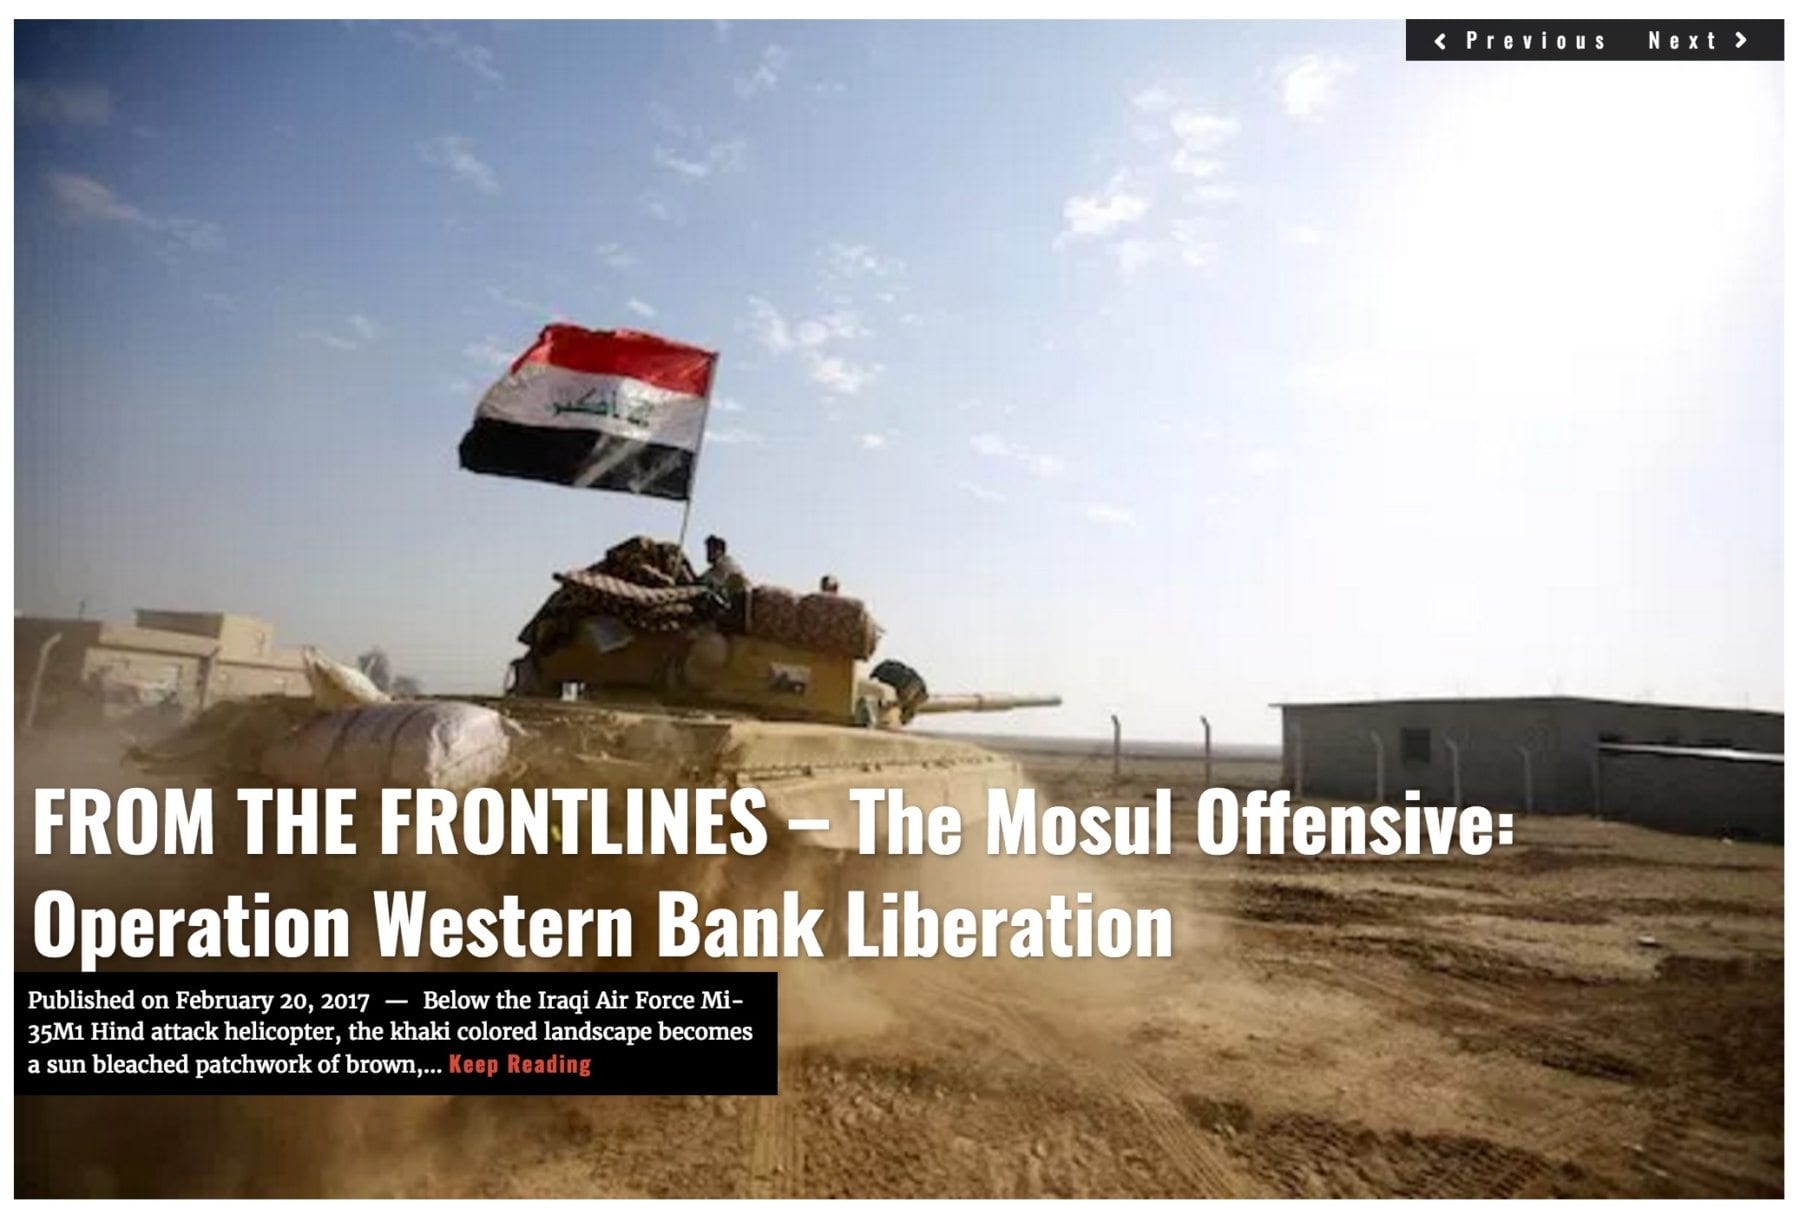 Image Mosul Offensive